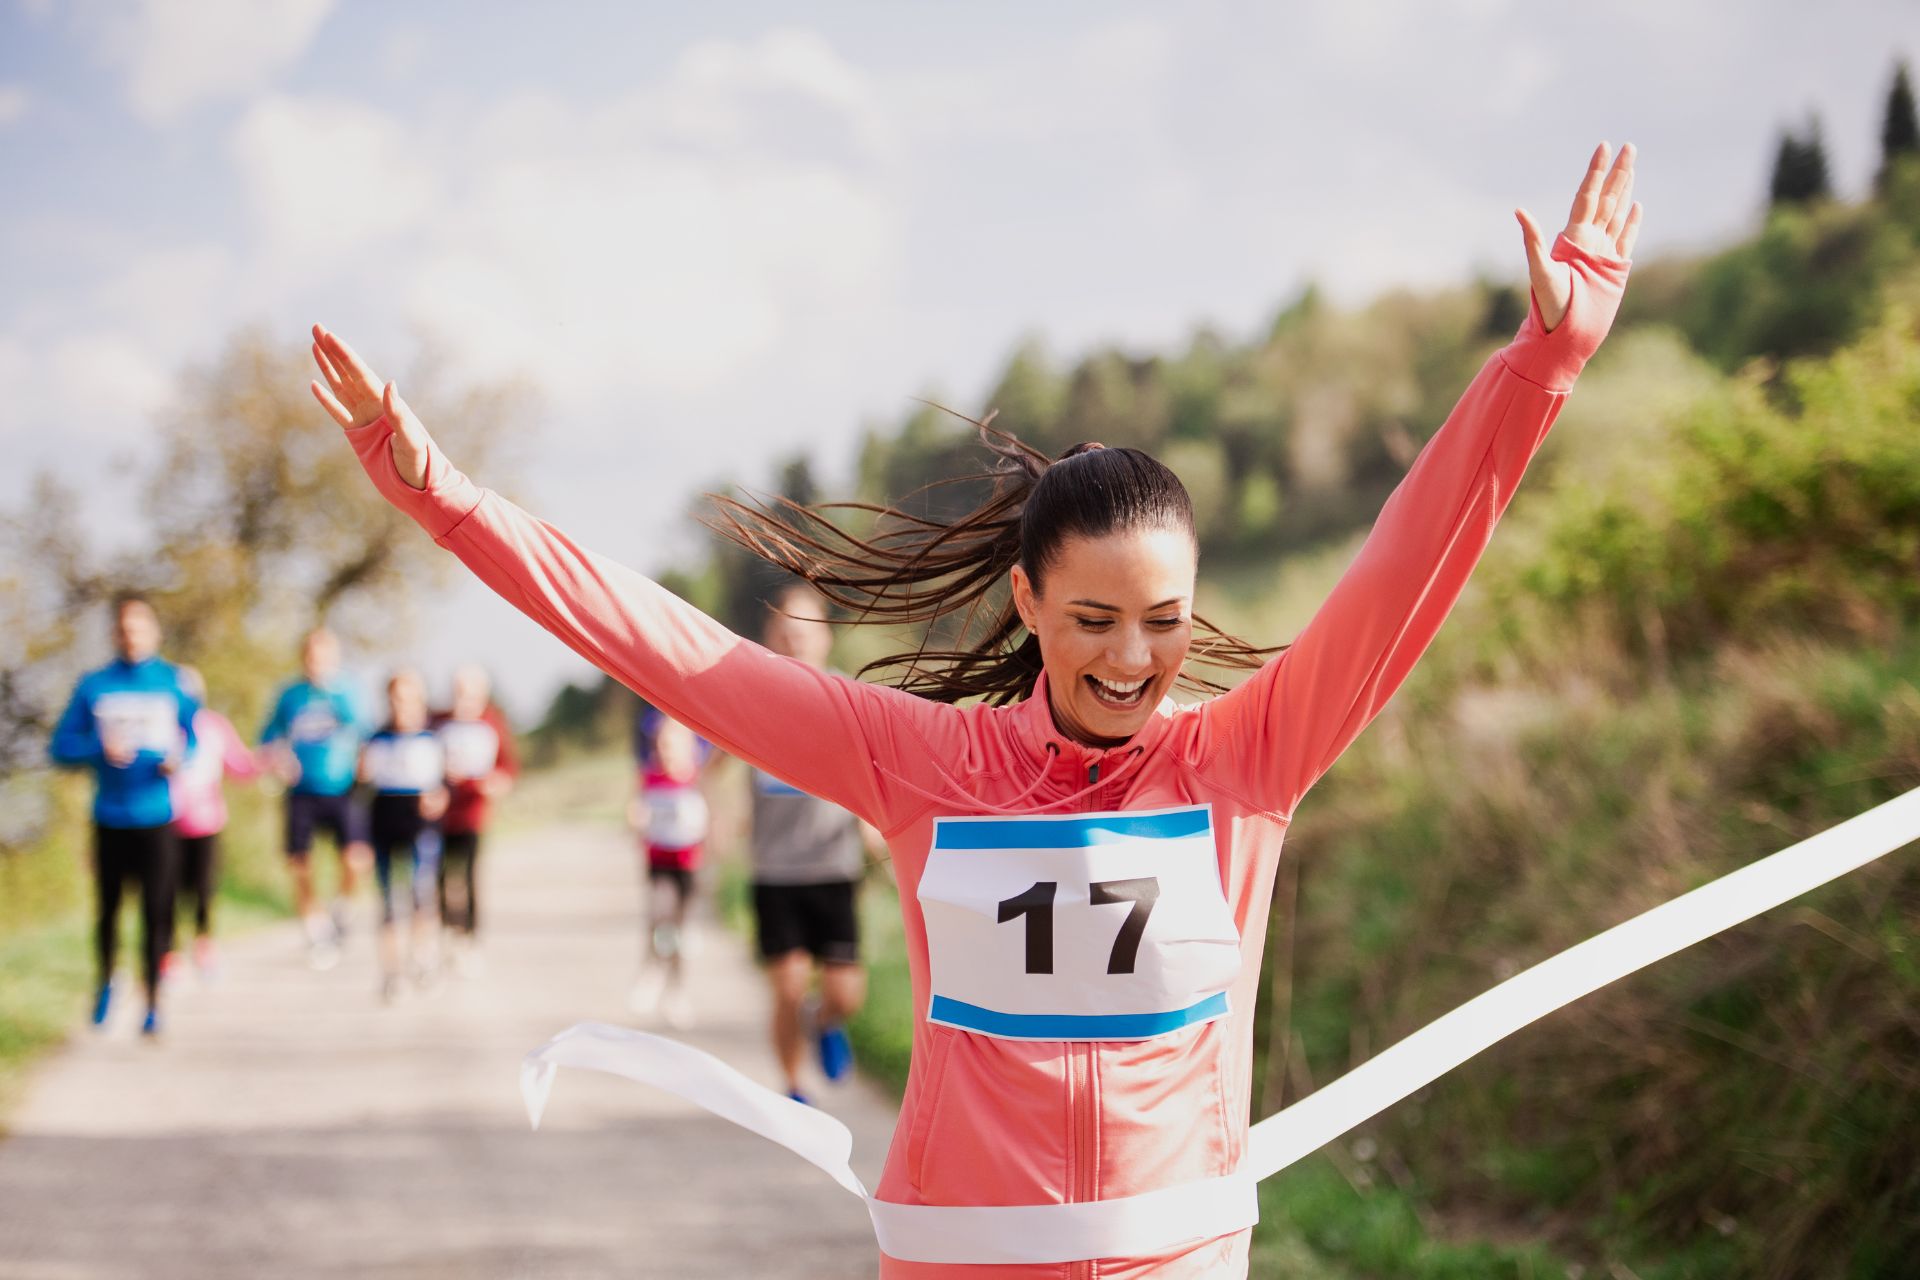 Mental strategies to help you the finish line